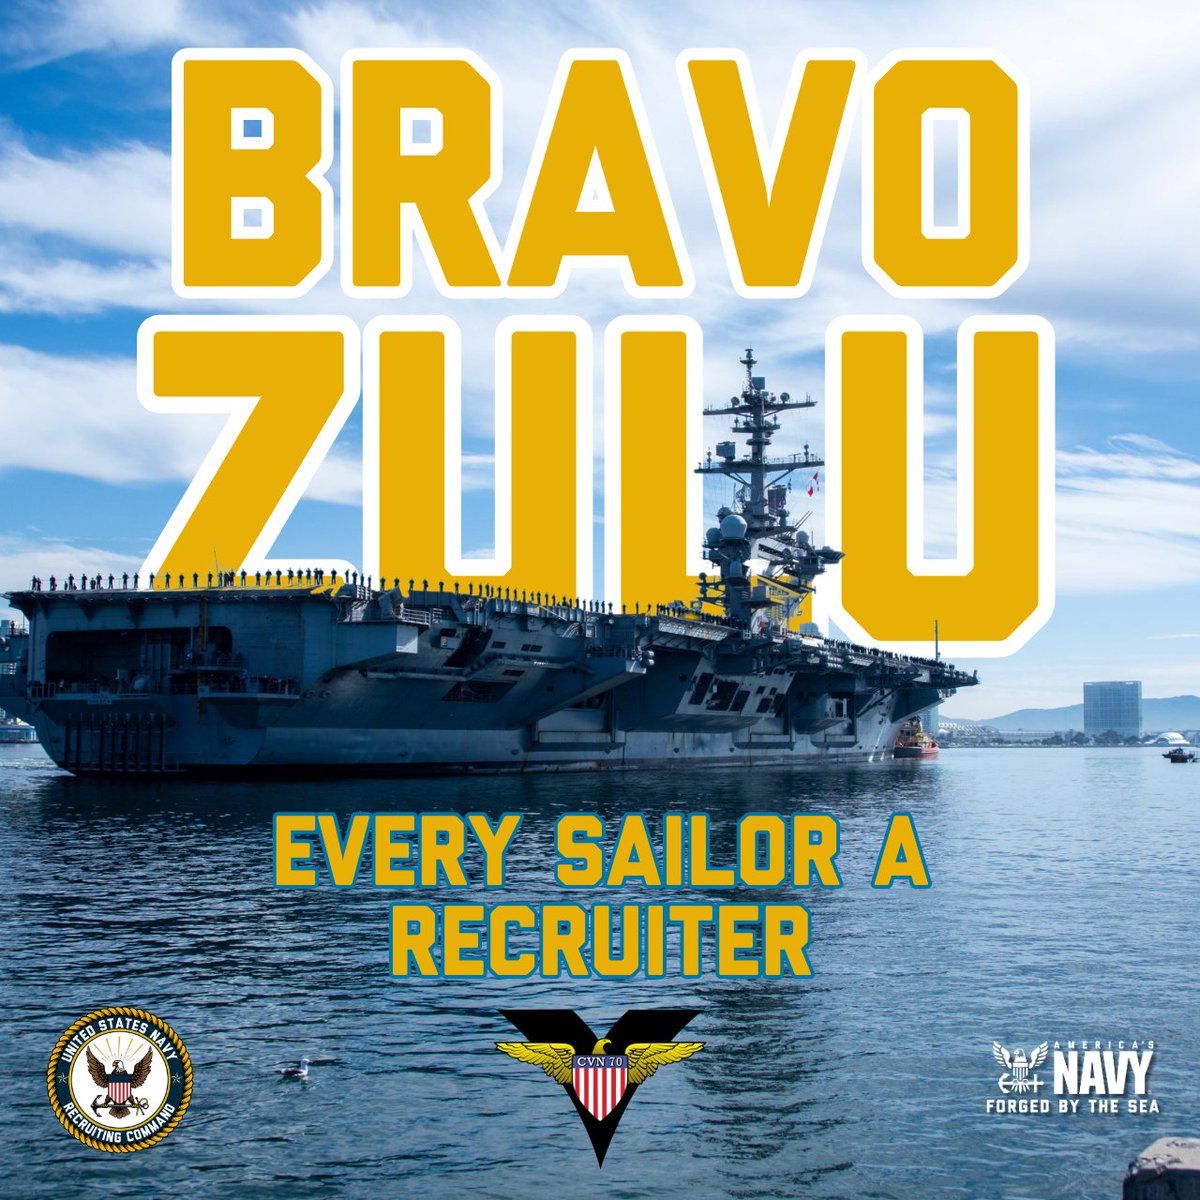 Returning this week to the #1 spot is USS Carl Vinson! View the full list - etoolbox.cnrc.navy.mil/esar.html #USNavy #Recruiting #Forgedbythesea #EverySailorARecruiter #FromSeabedToSpace